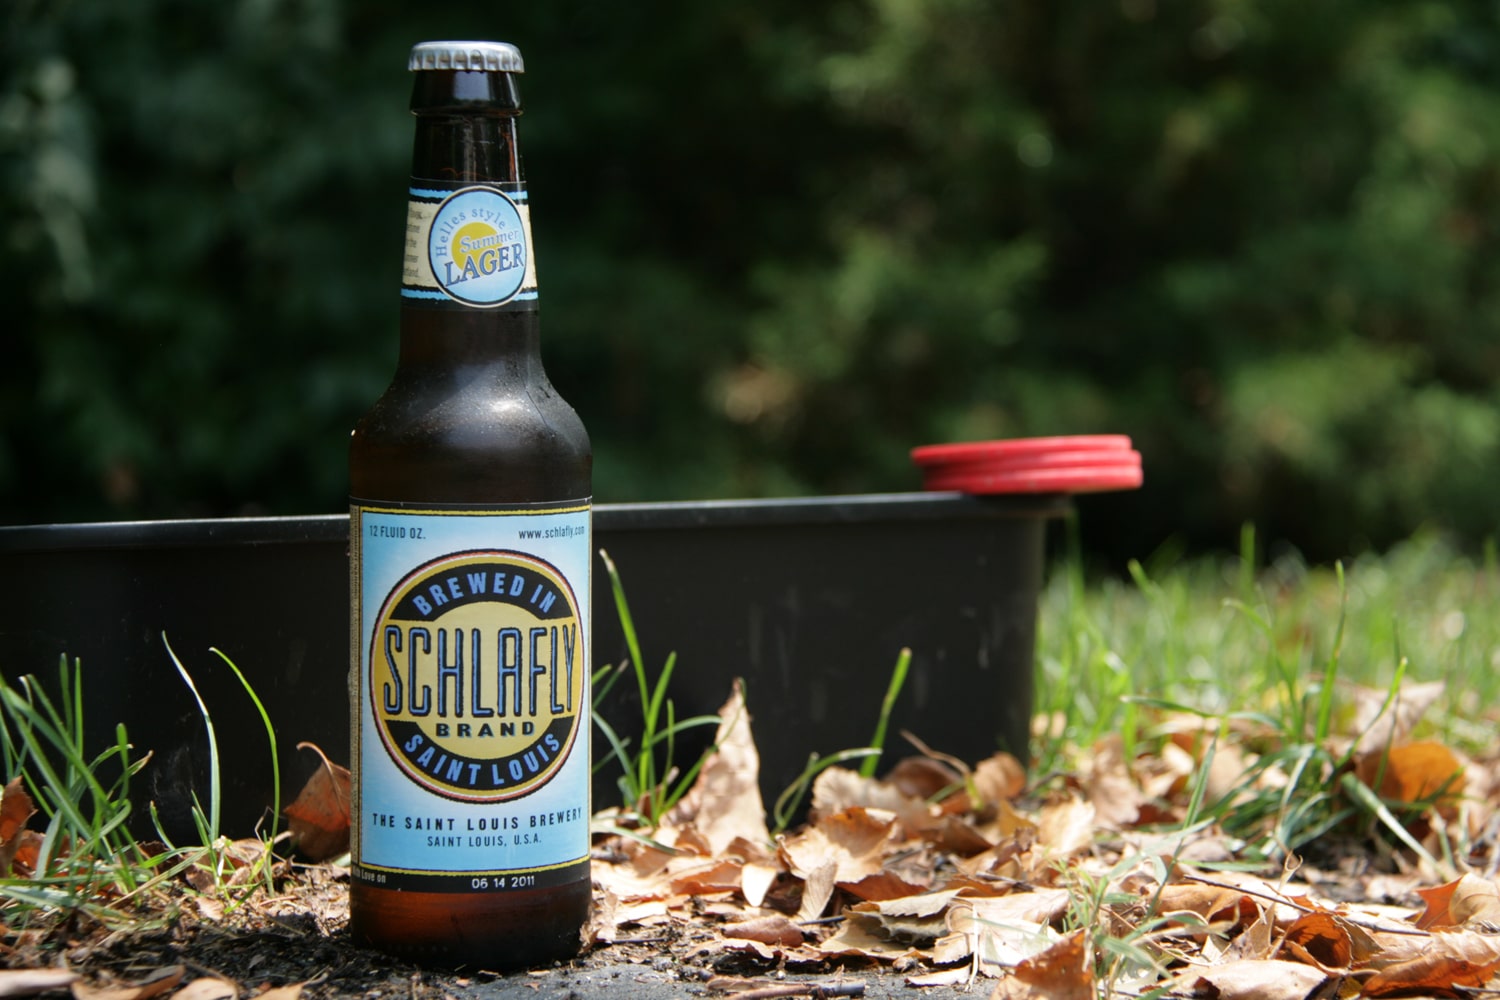 Schlafly summer beer is a tasty helles-style lager.